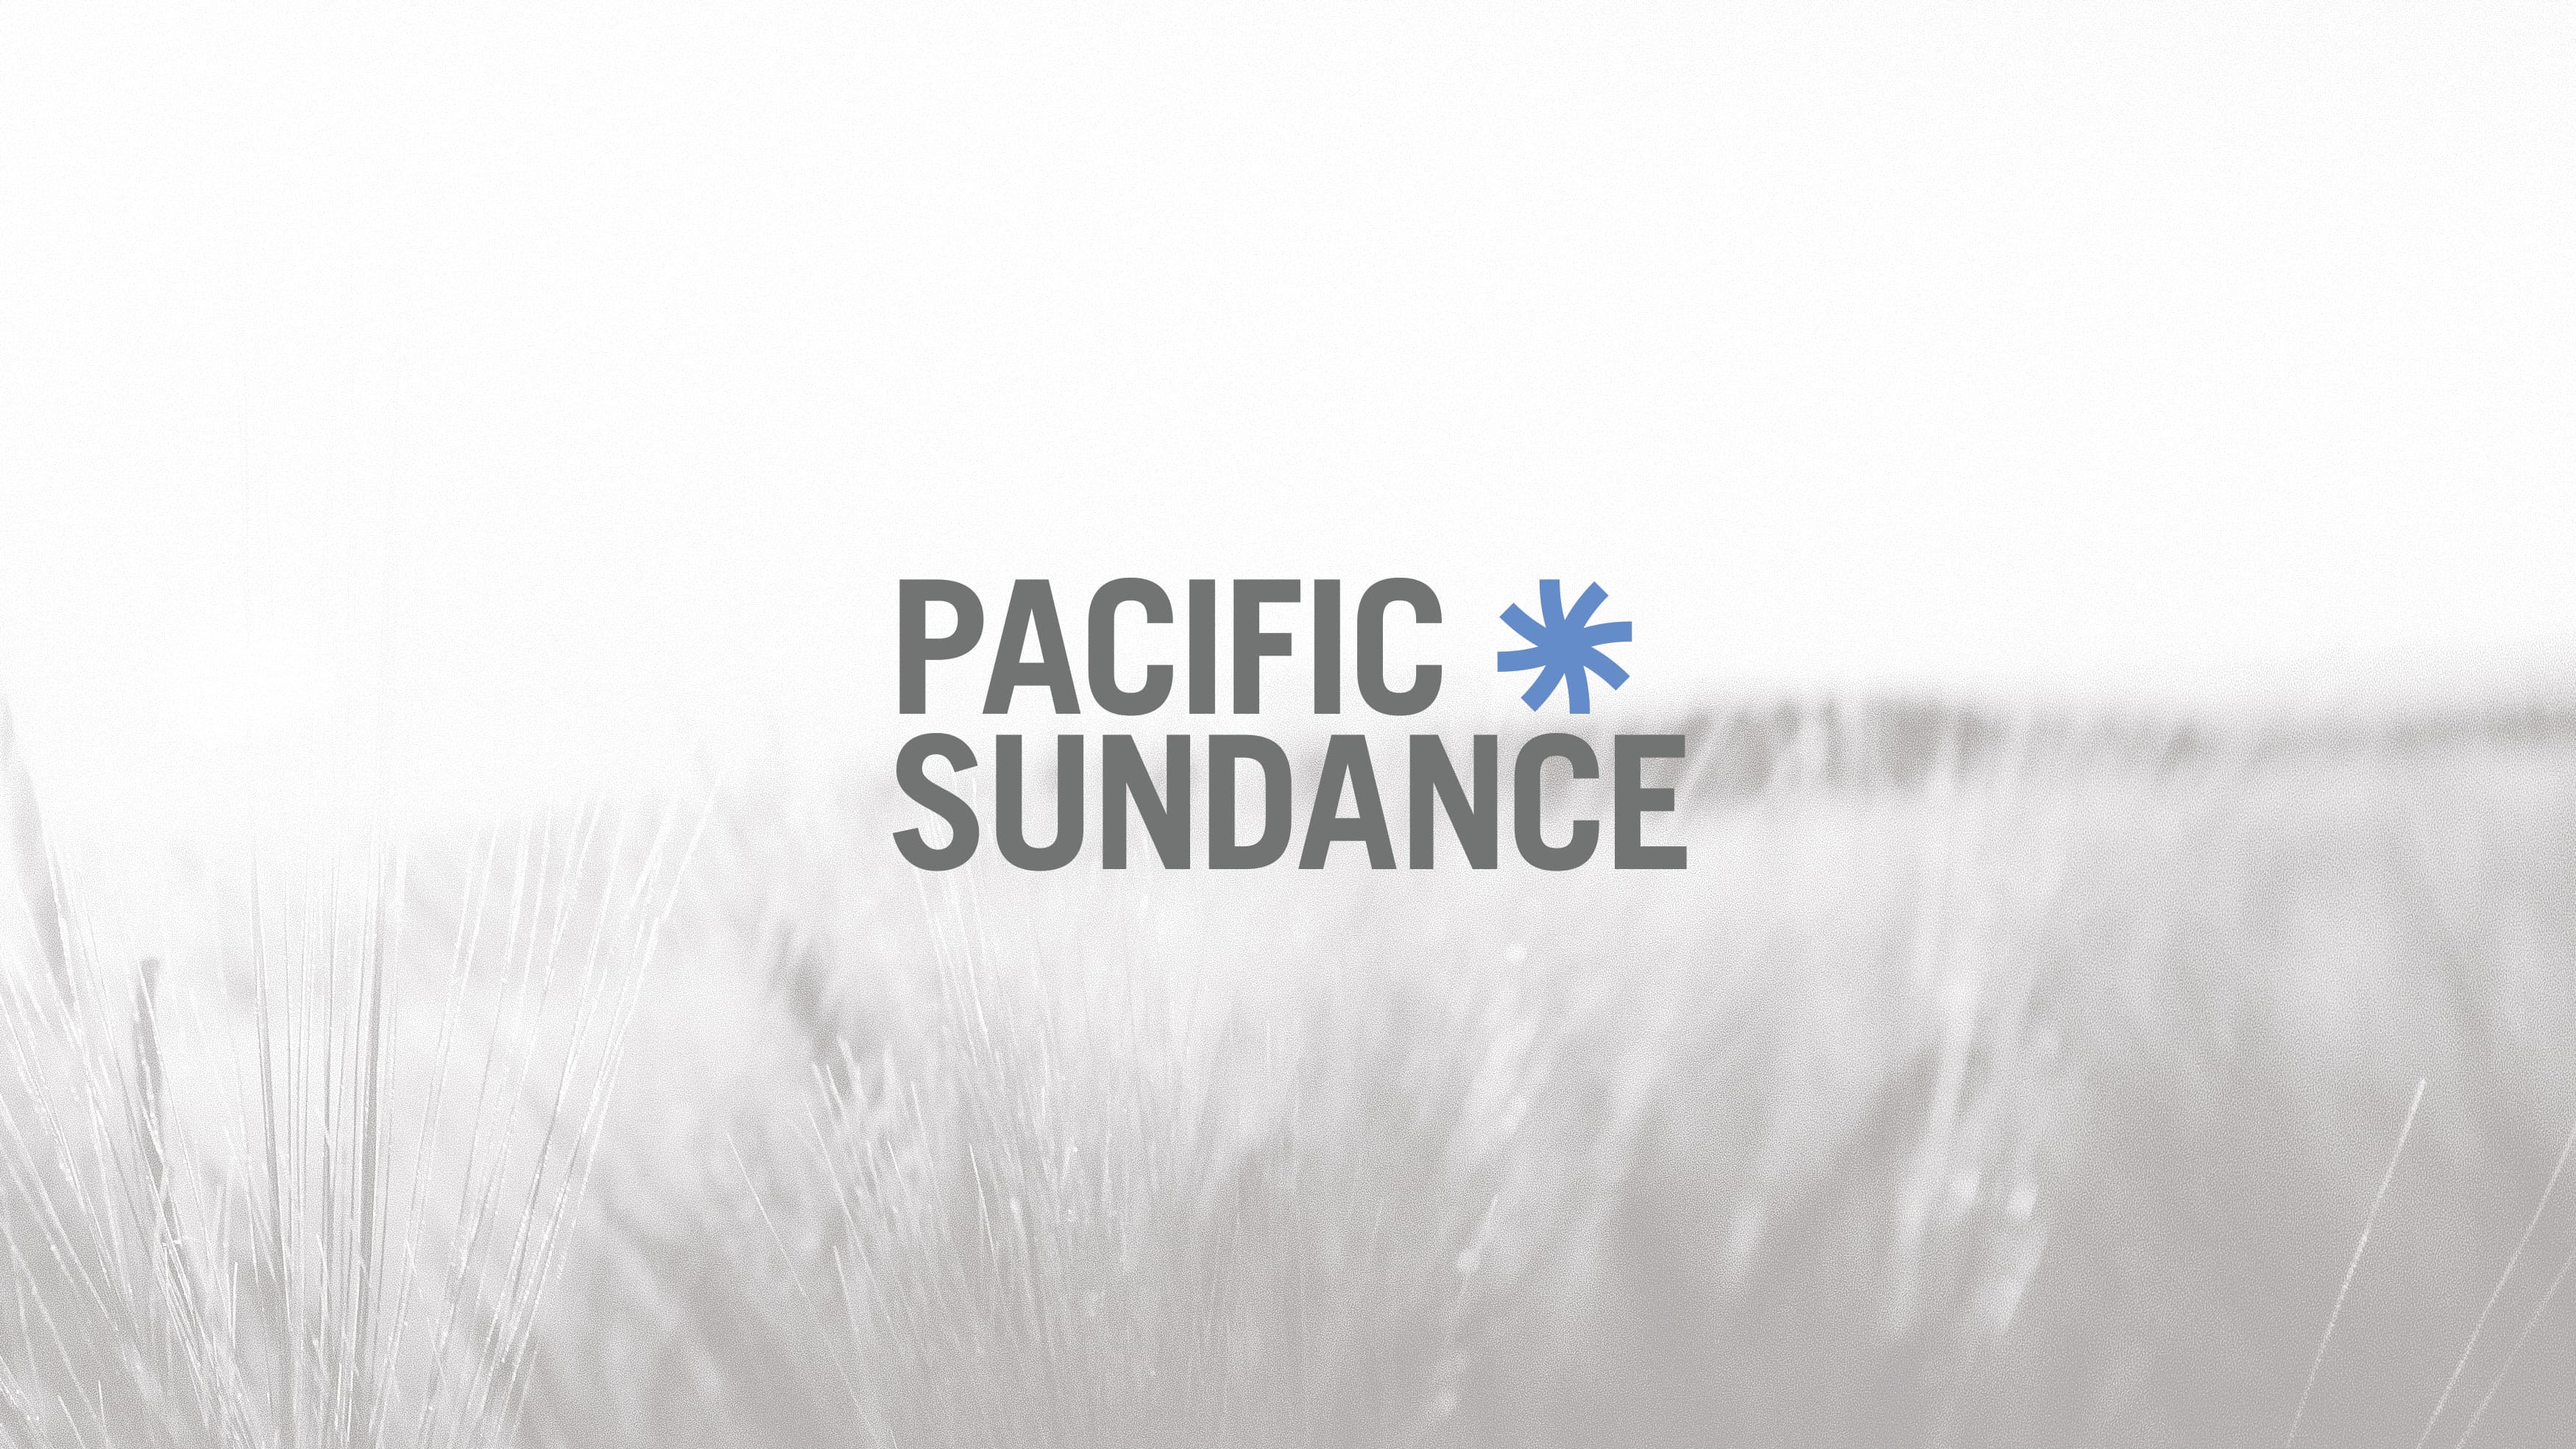 Logo design for Pacific Sundance on top of a black and white image of a field.